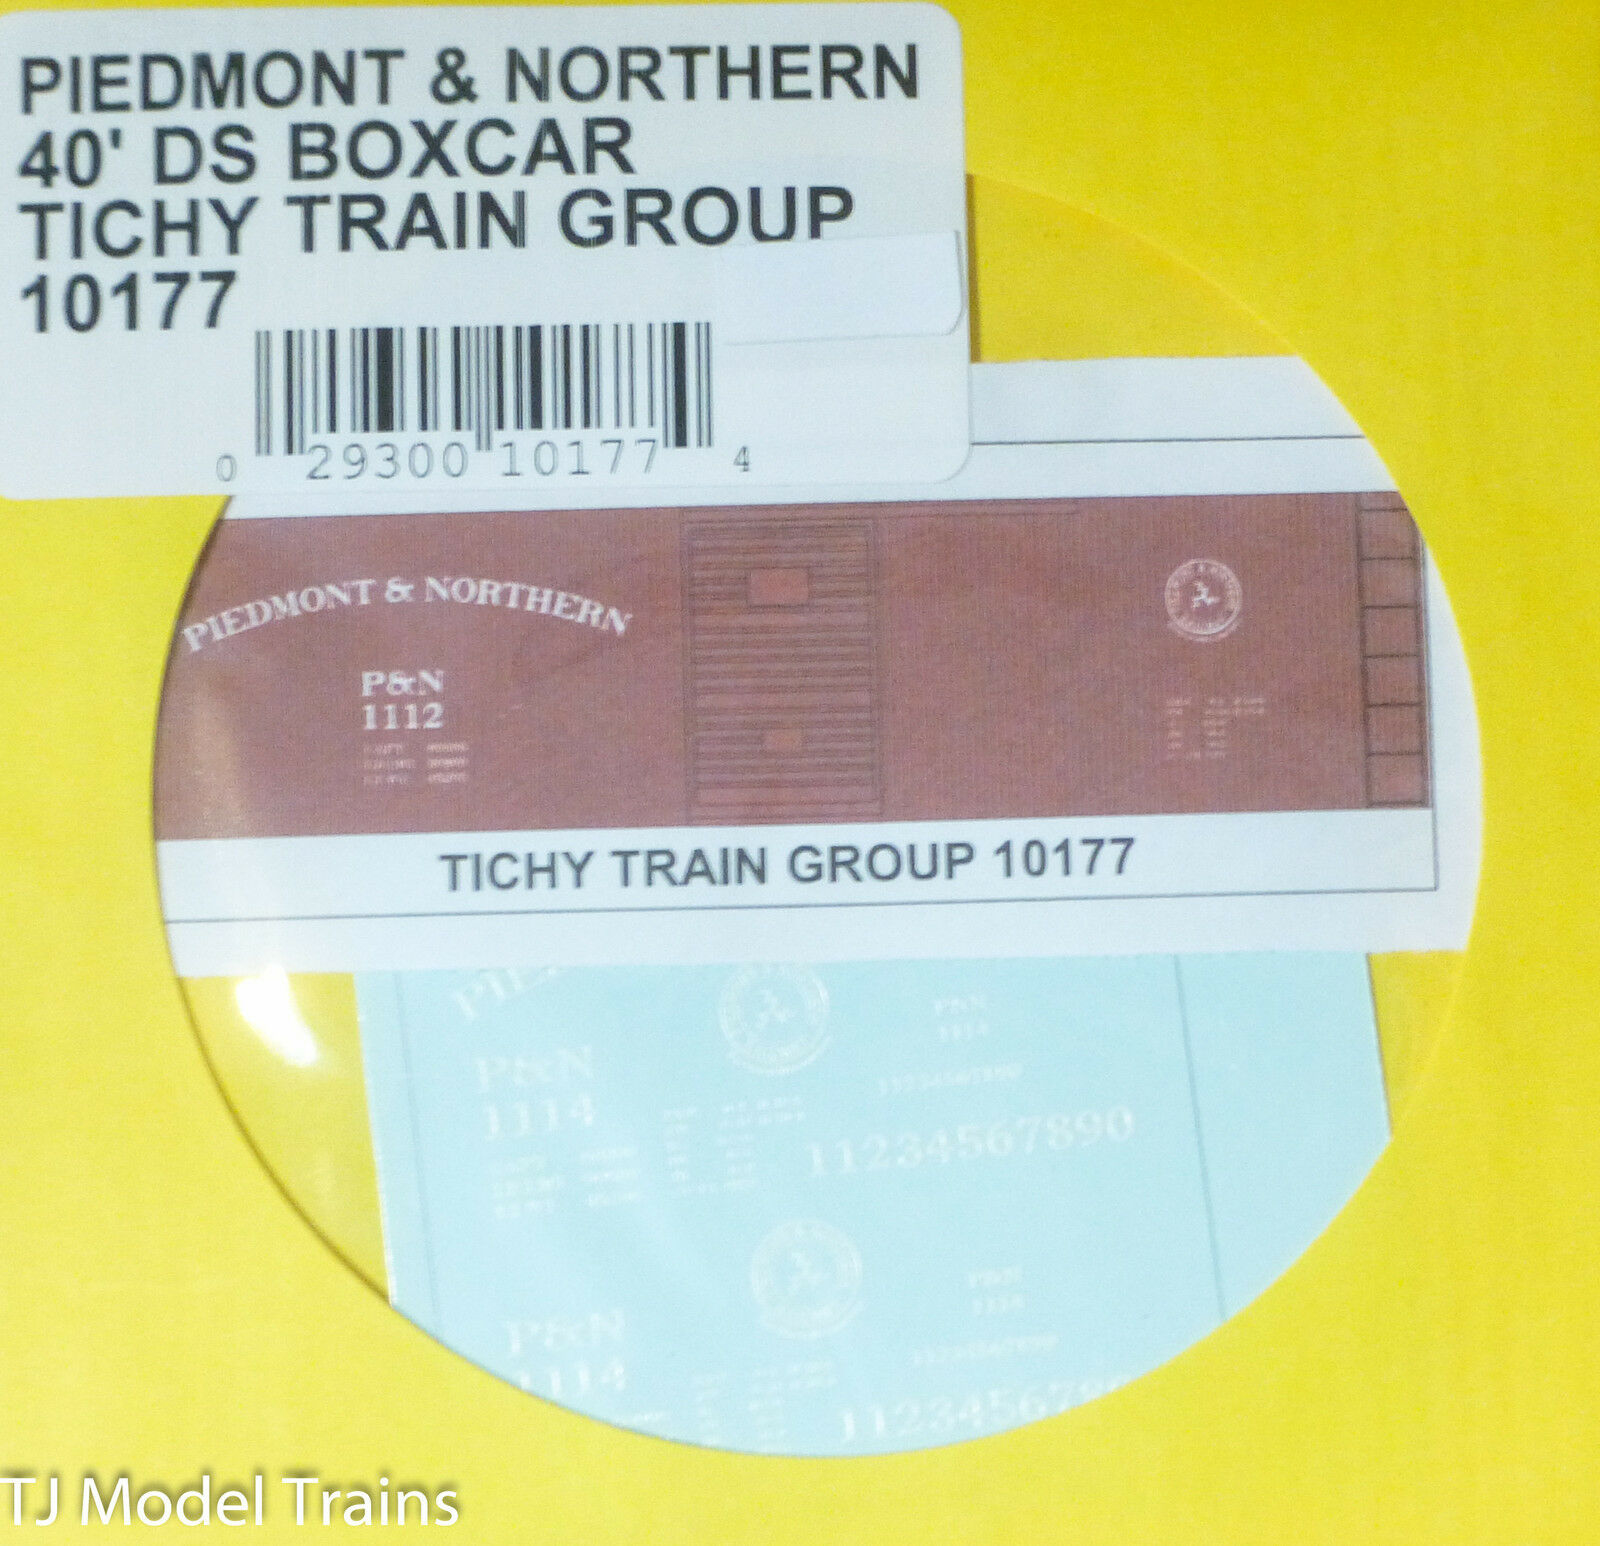 Tichy Train Group #10177 Decal For: Piedmont & Northern 40' Double-sheathed Boxc